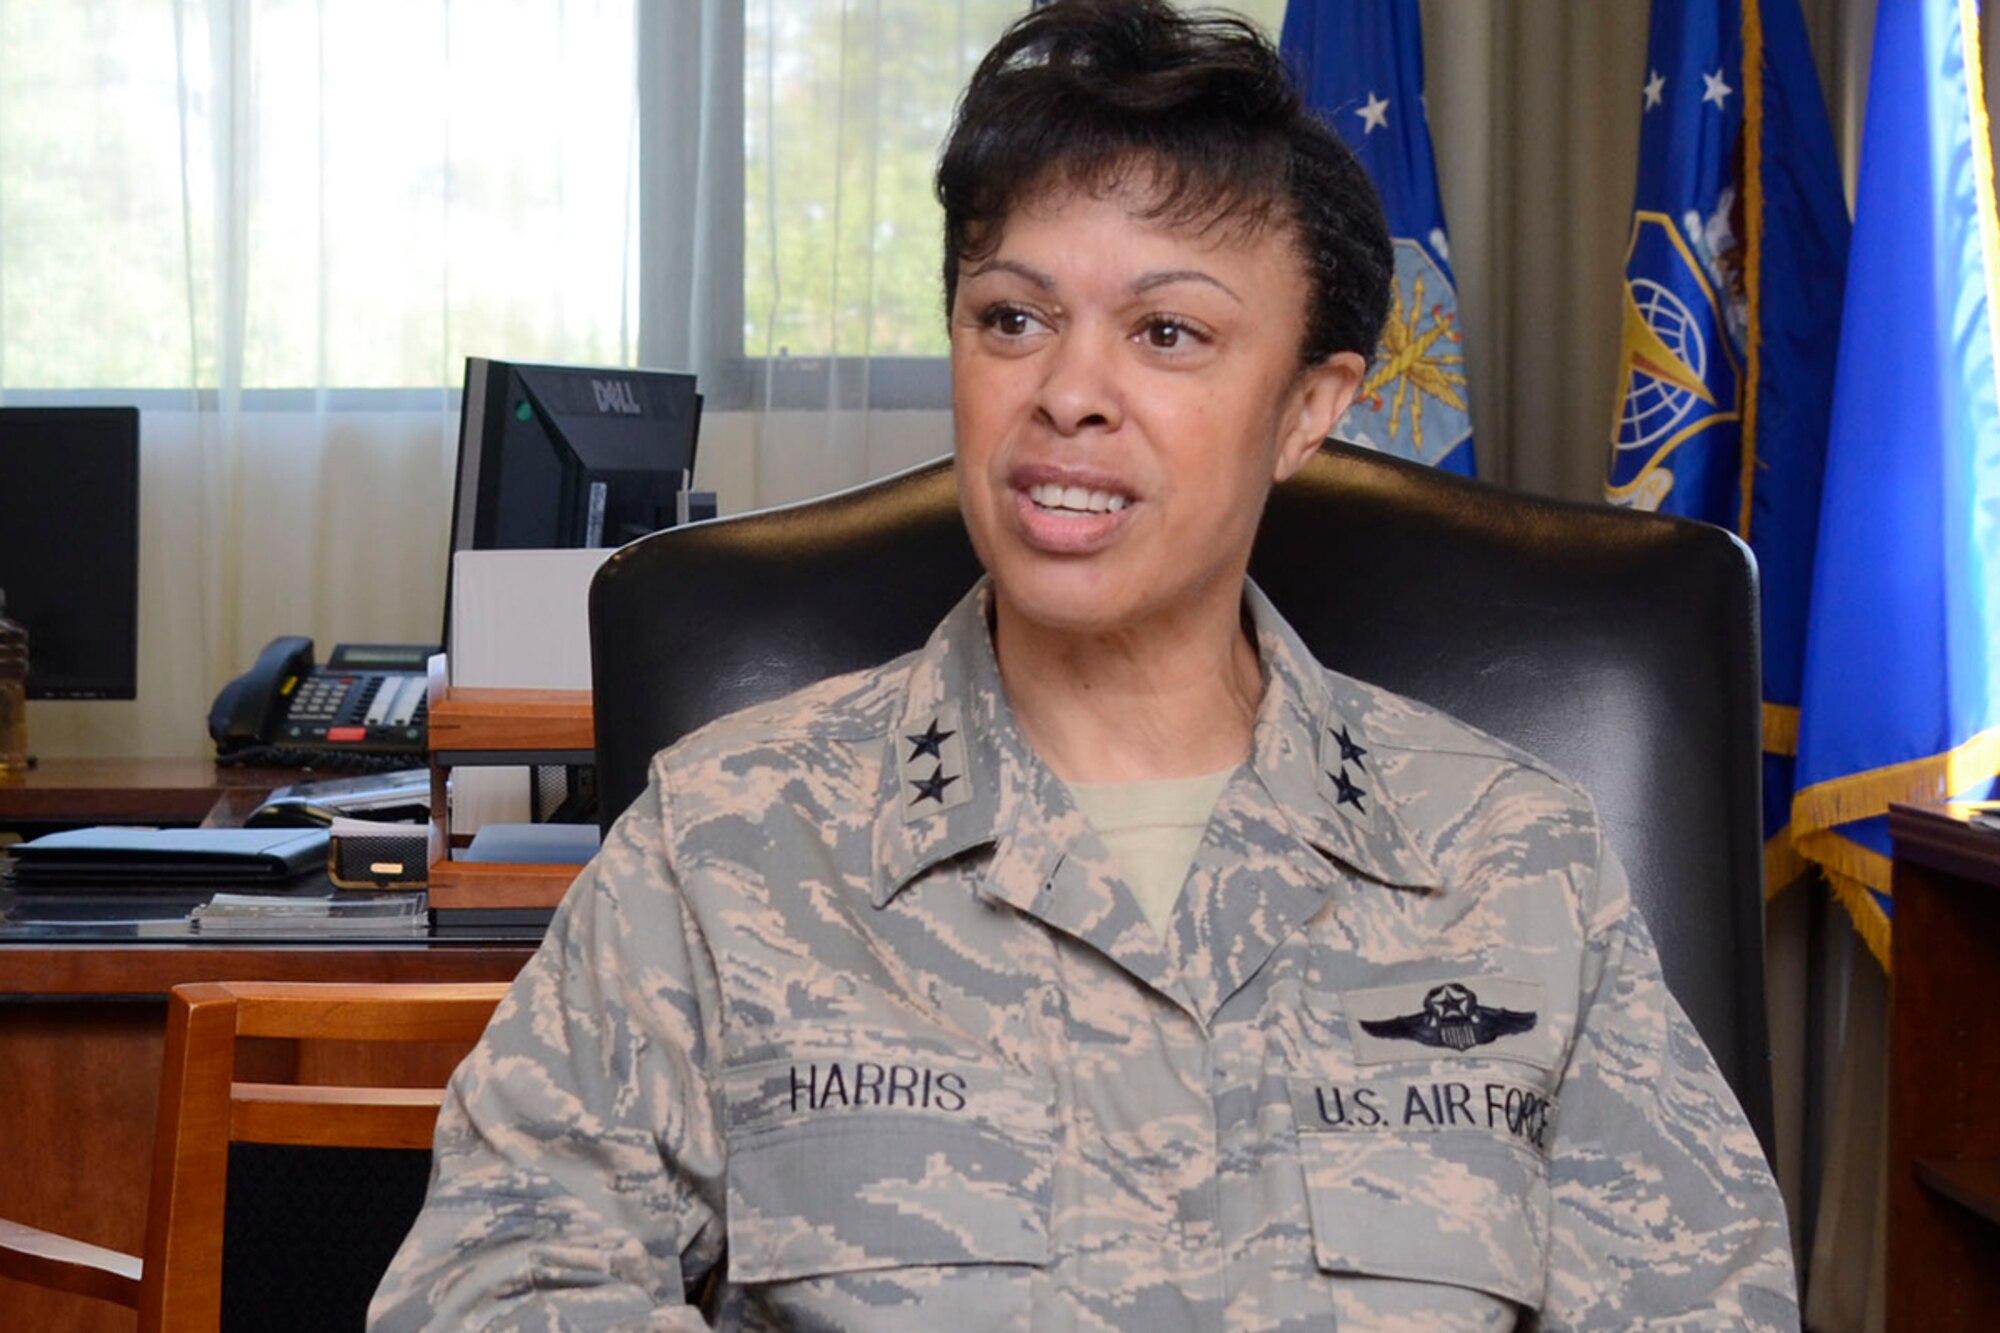 Members of the 94th Airlift Wing Human Resource Development Council had the opportunity to interview Maj. Gen. Stayce D. Harris, 22nd Air Force commander, in celebrattion of Women’s Equality Day 2014. Harris discussed her love and compassion for service, and what it means to be an Airman, mentor and leader. (U.S. Air Force photo/Don Peek)